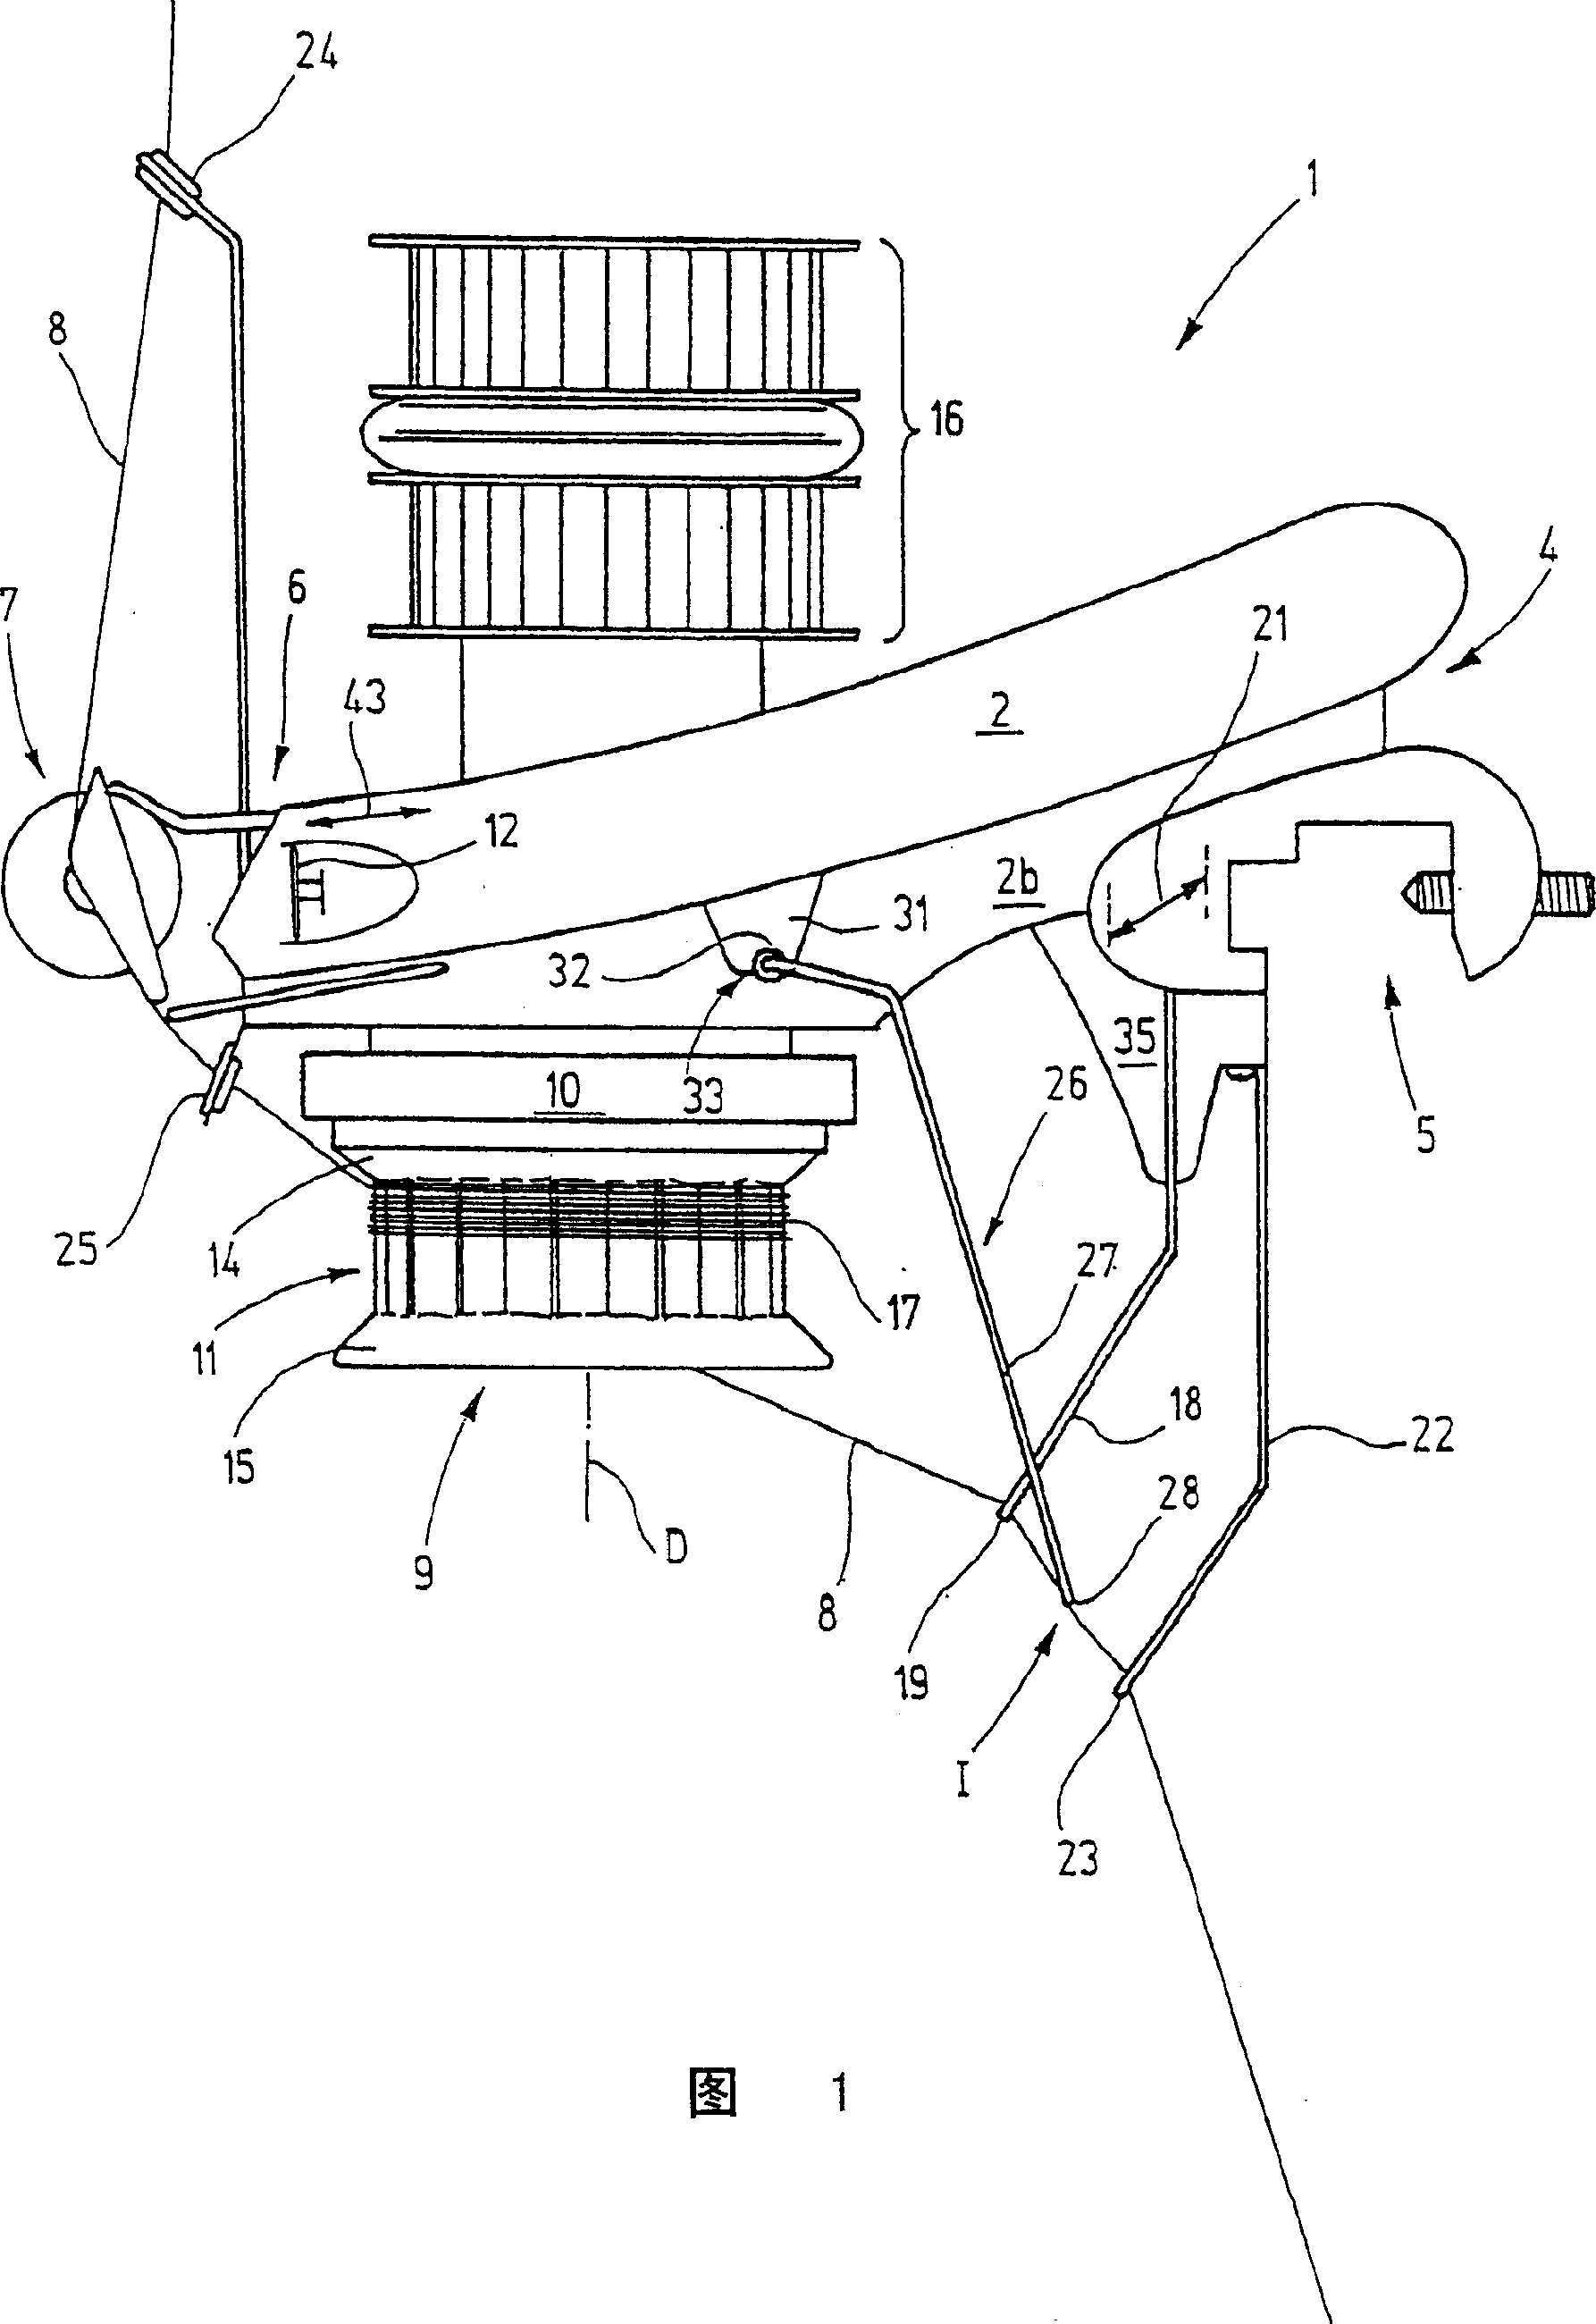 Thread feeding device comprising spring stop for thread detecting